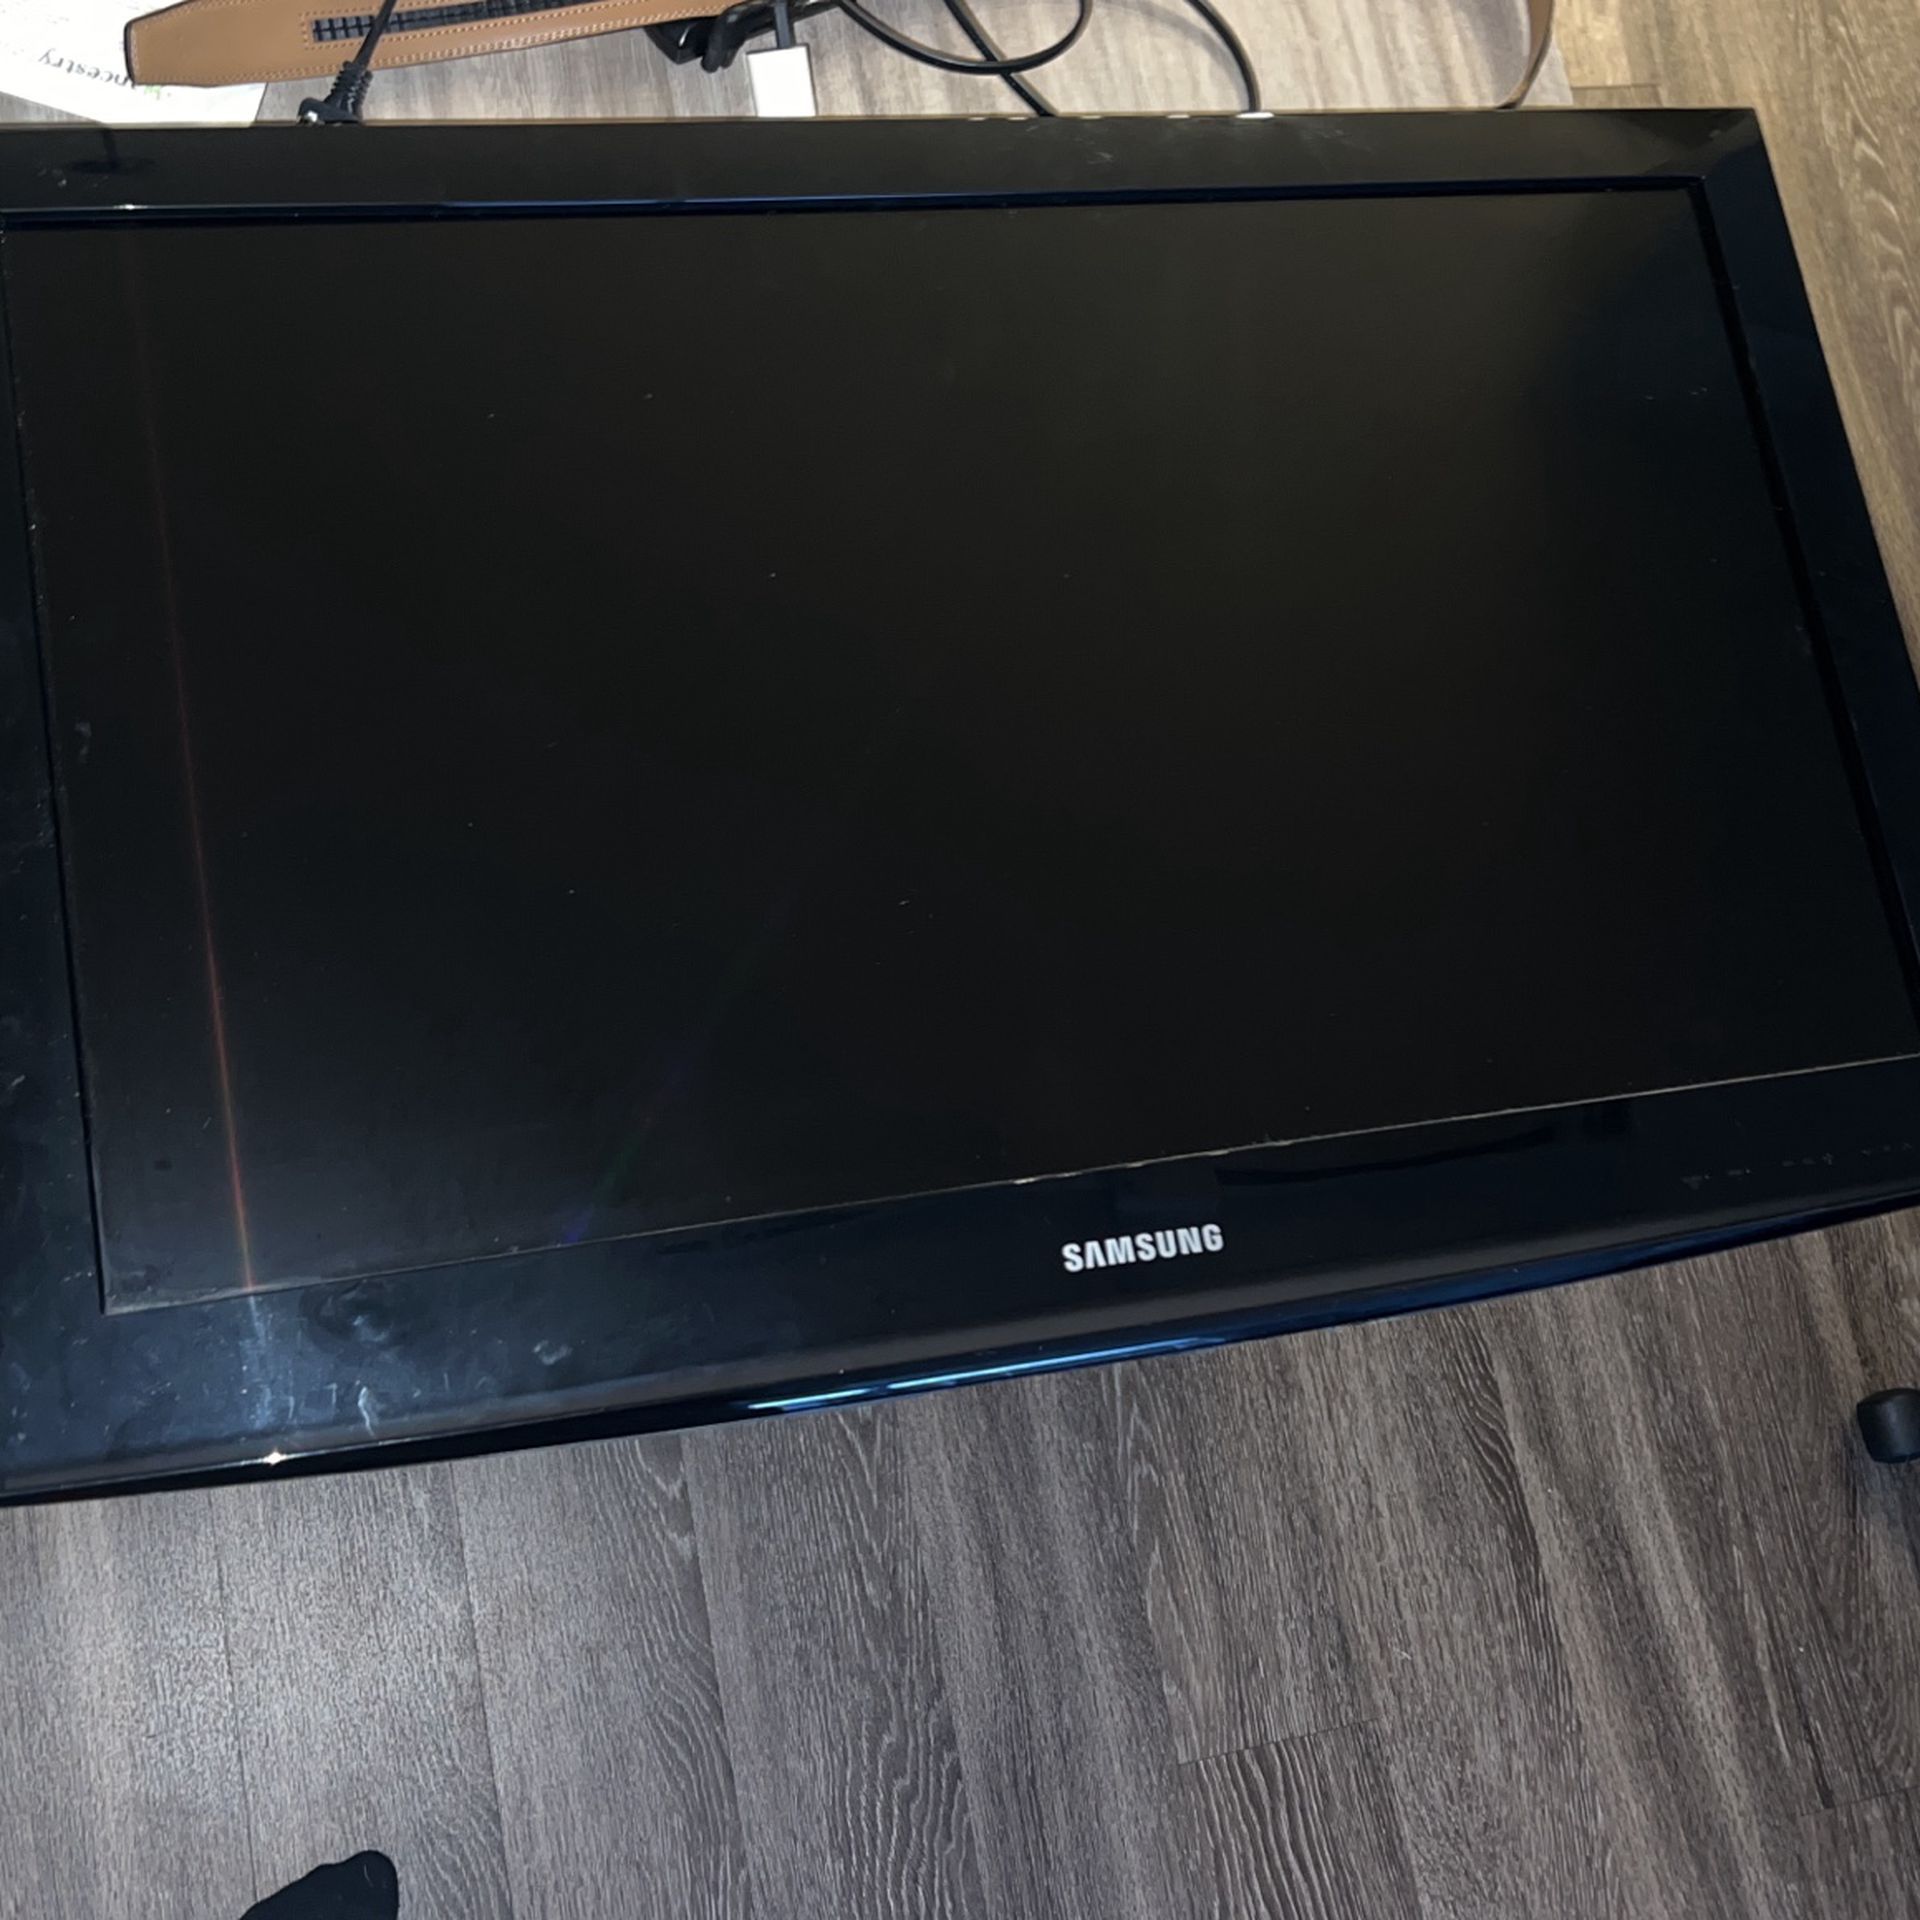 32 Inch Samsung 2011 And Fire stick + TV STAND  Great For Kids Room. 